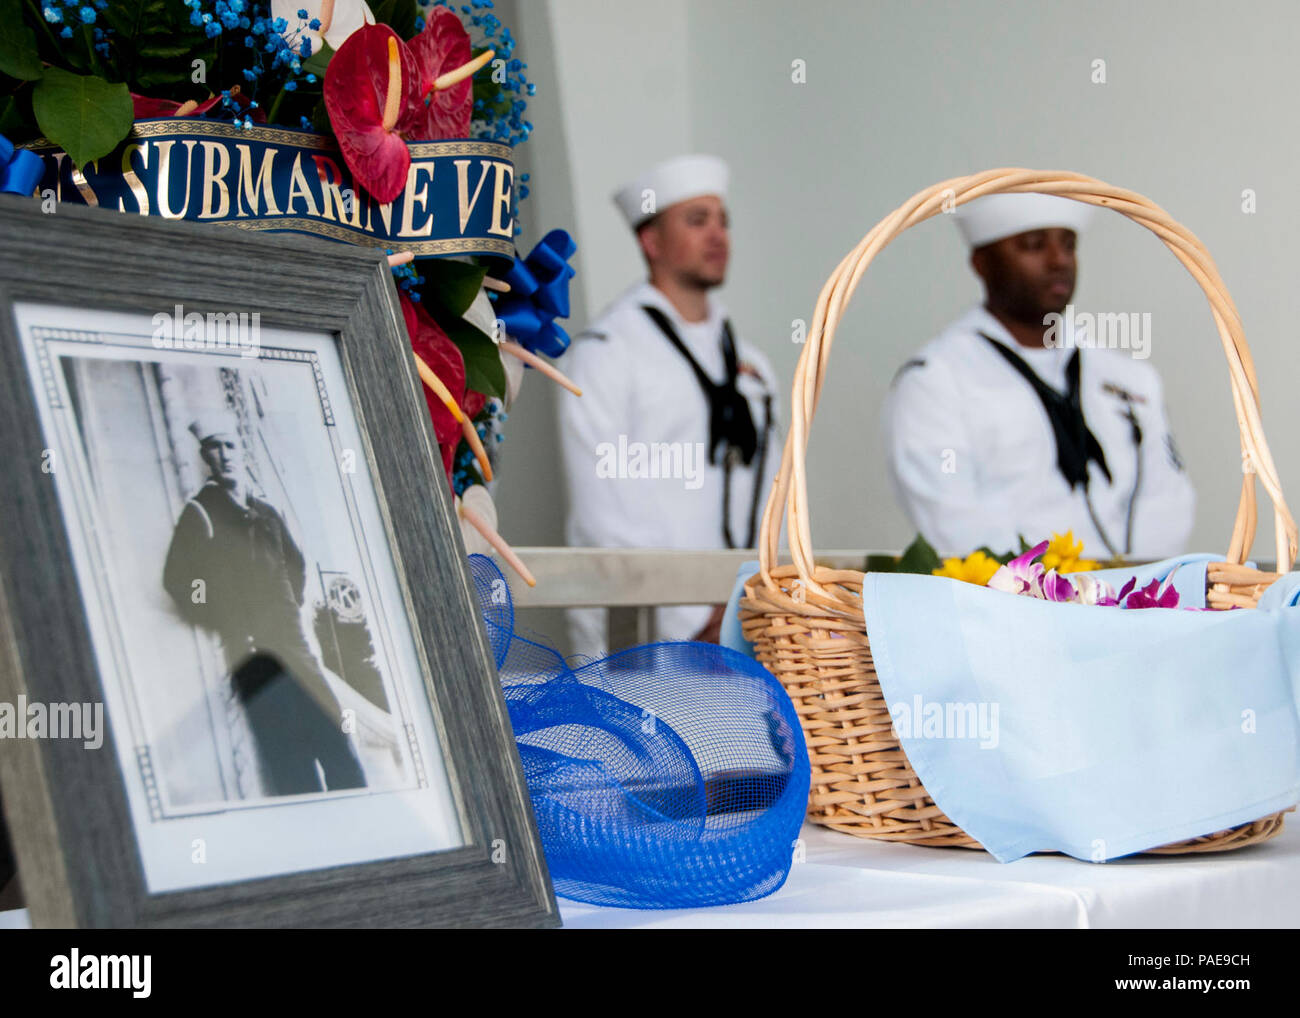 PEARL HARBOR (Dec. 7, 2017) A framed photo is showcased of Chief Boatswain’s Mate Joseph George, who was posthumously awarded the Bronze Star with Valor during a ceremony aboard the USS Arizona Memorial. The 76th commemoration of the attacks on Peal Harbor, co-hosted by the U.S. Military, the National Park Service and the State of Hawaii, provided veterans, family members, service members and the community a chance to honor the sacrifices made by those who were present Dec. 7, 1941, as well as throughout the Pacific theater. Since the attacks, the U.S. and Japan have endured more than 70 years Stock Photo